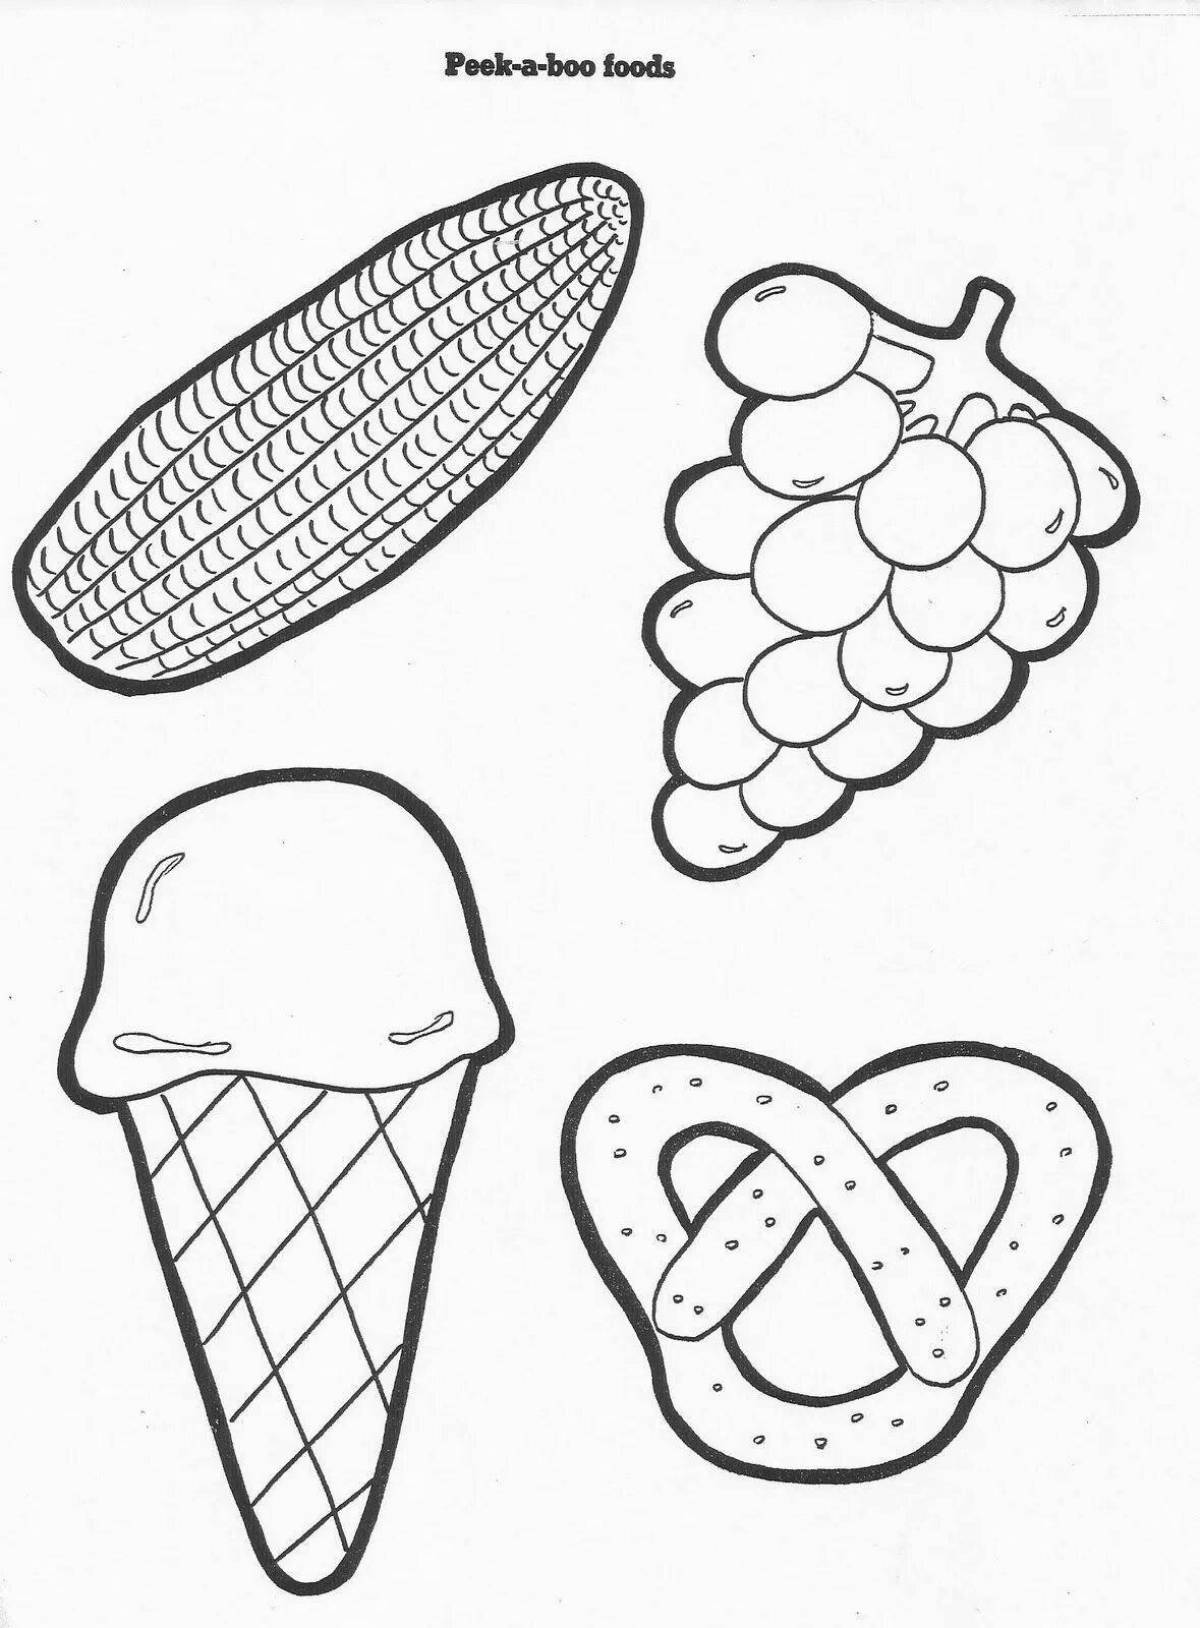 Coloring page of balanced healthy food